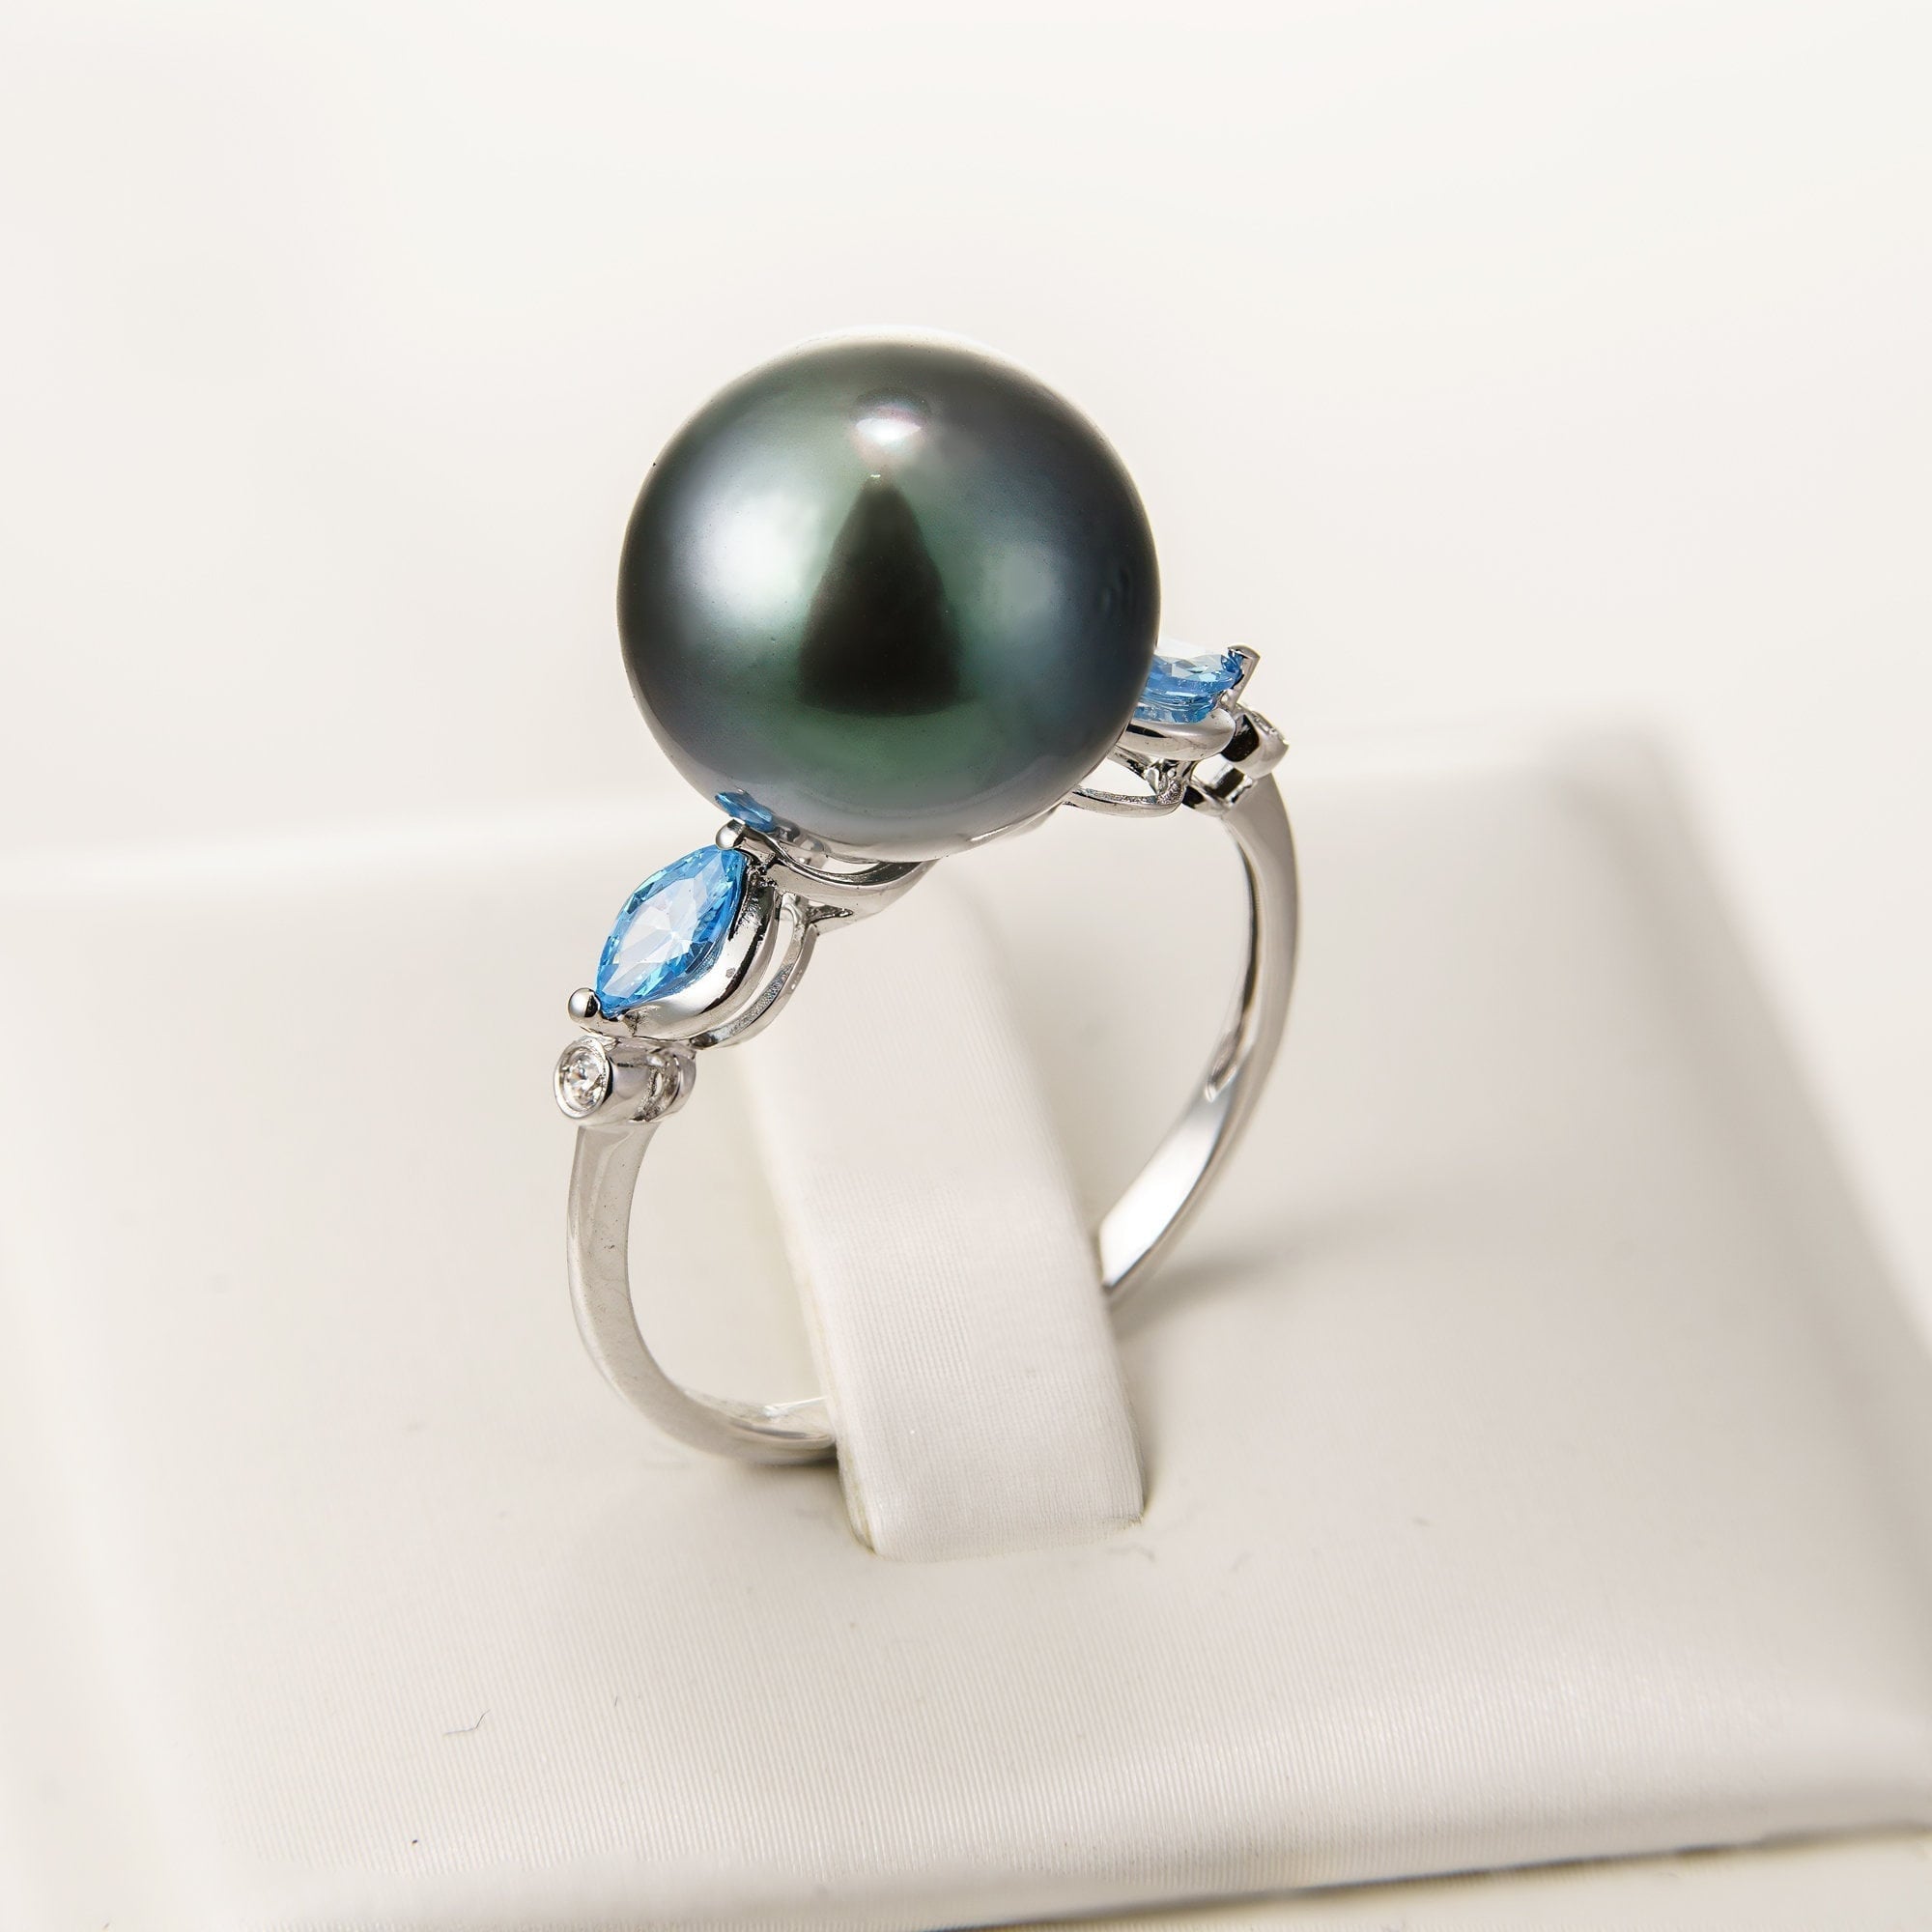 12mm tahitian pearl ring, size 7.5 us, 925 sterling silver with cubic zirconia